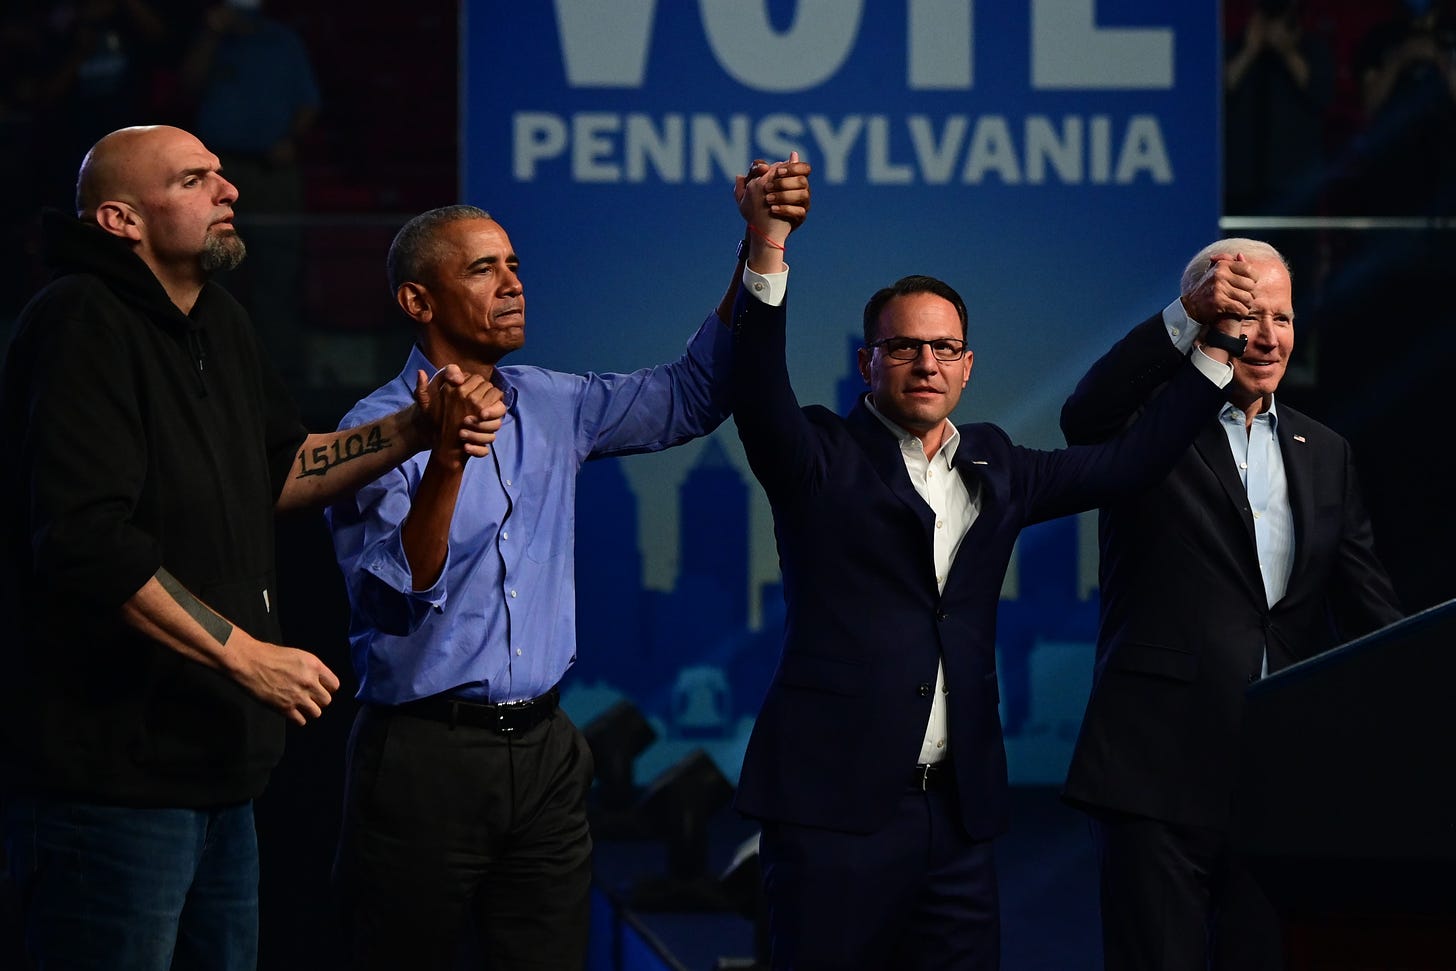 Democratic candidate for U.S. Senator John Fetterman, former President Barack Obama, Democratic candidate for Governor Josh Shapiro, and President Joe Biden raise their arms when departing after a rally at the Liacouras Center on November 5, 2022 in Philadelphia, Pennsylvania. (Photo by Mark Makela/Getty Images)